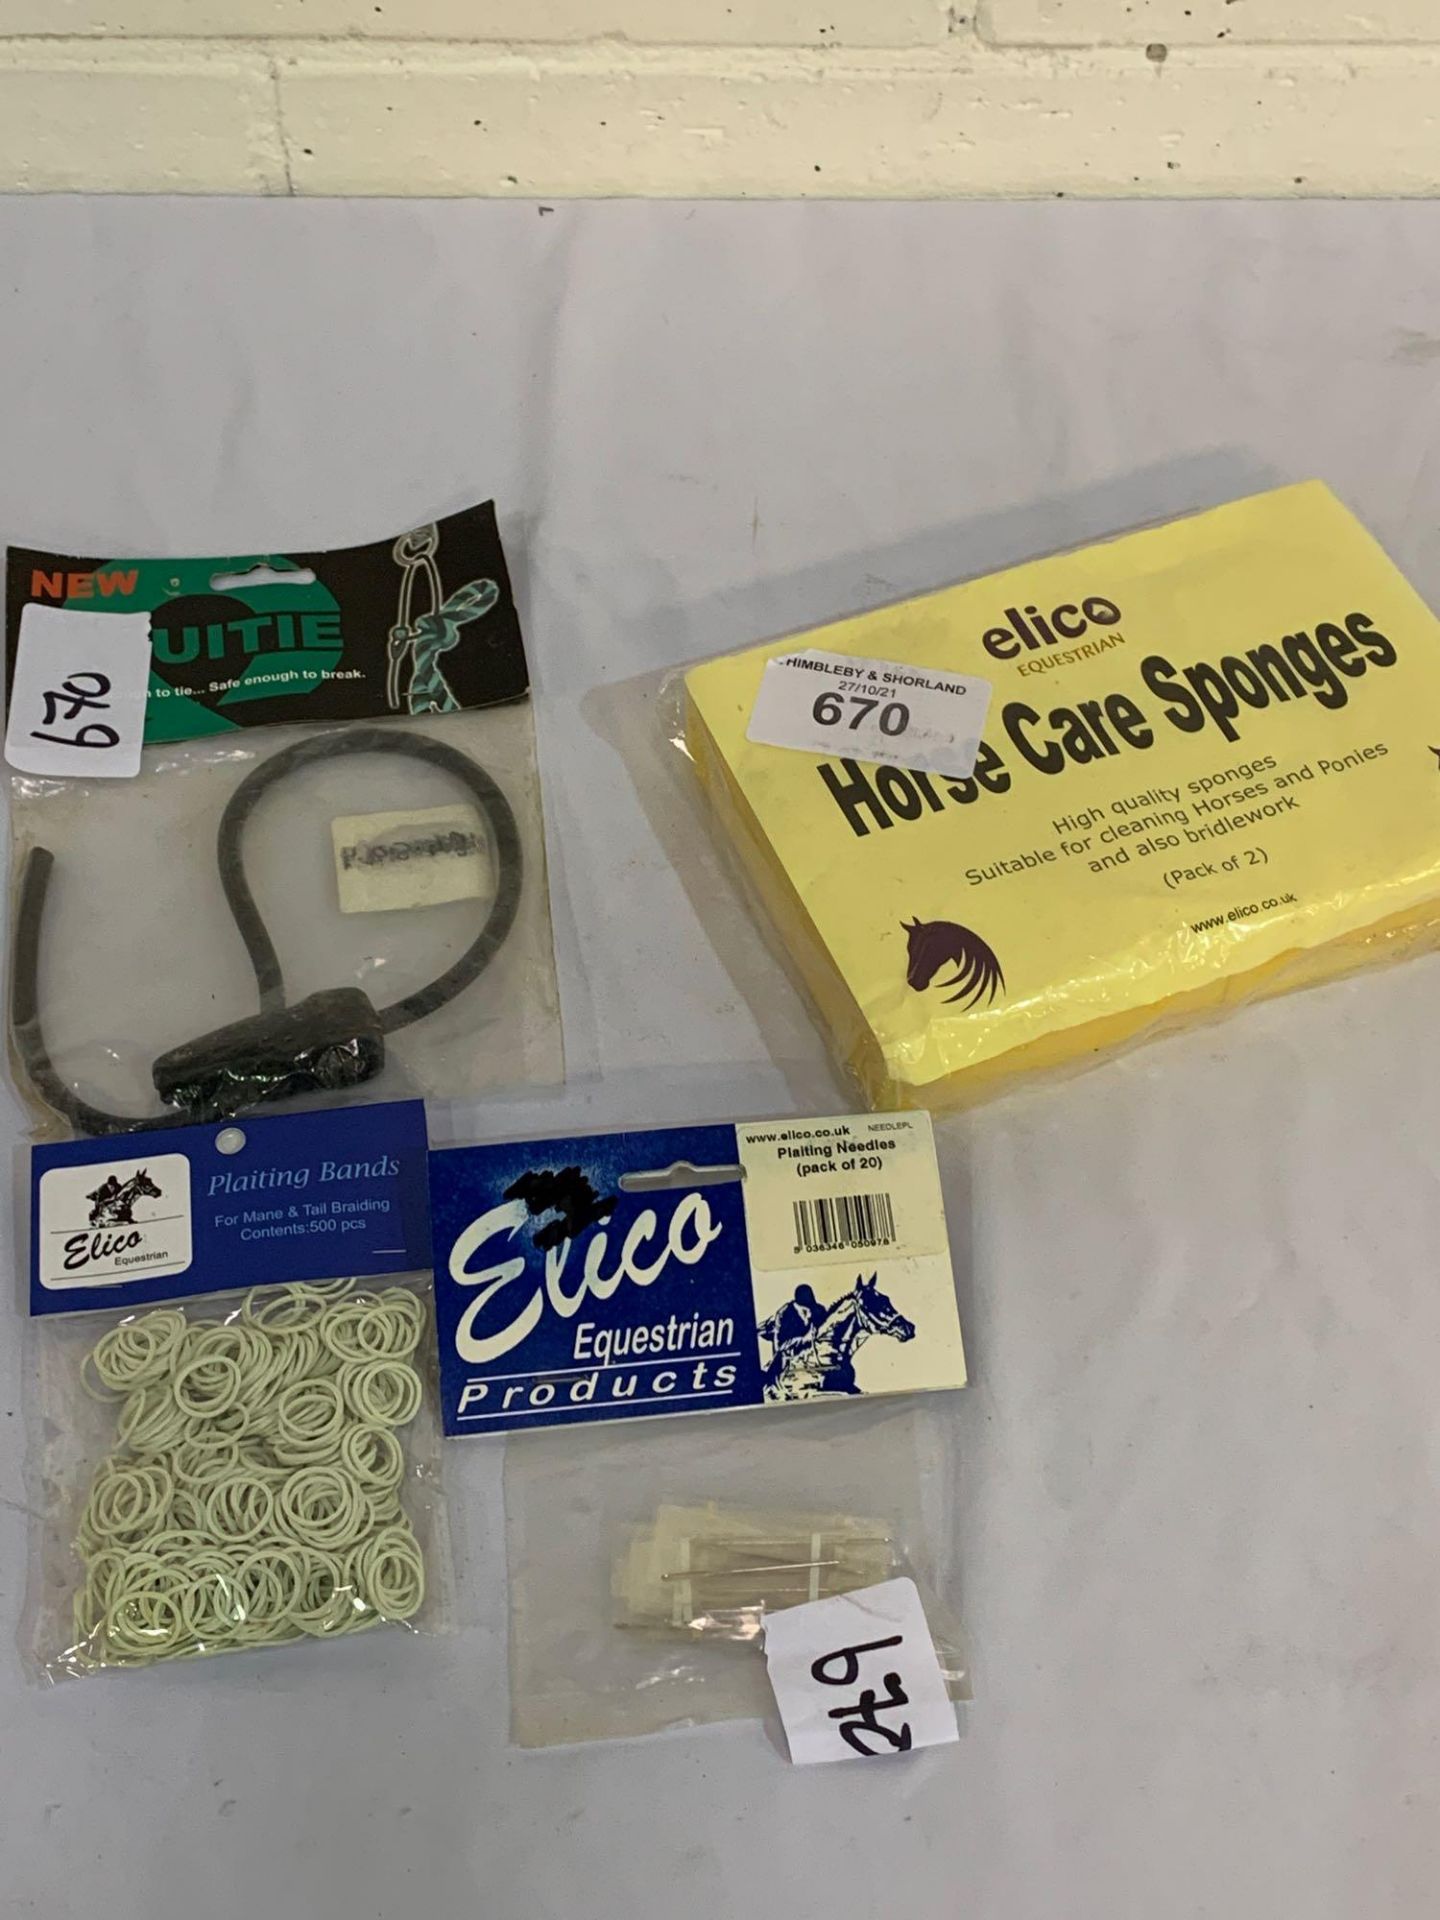 Quantity of Elico plaiting needles and bands